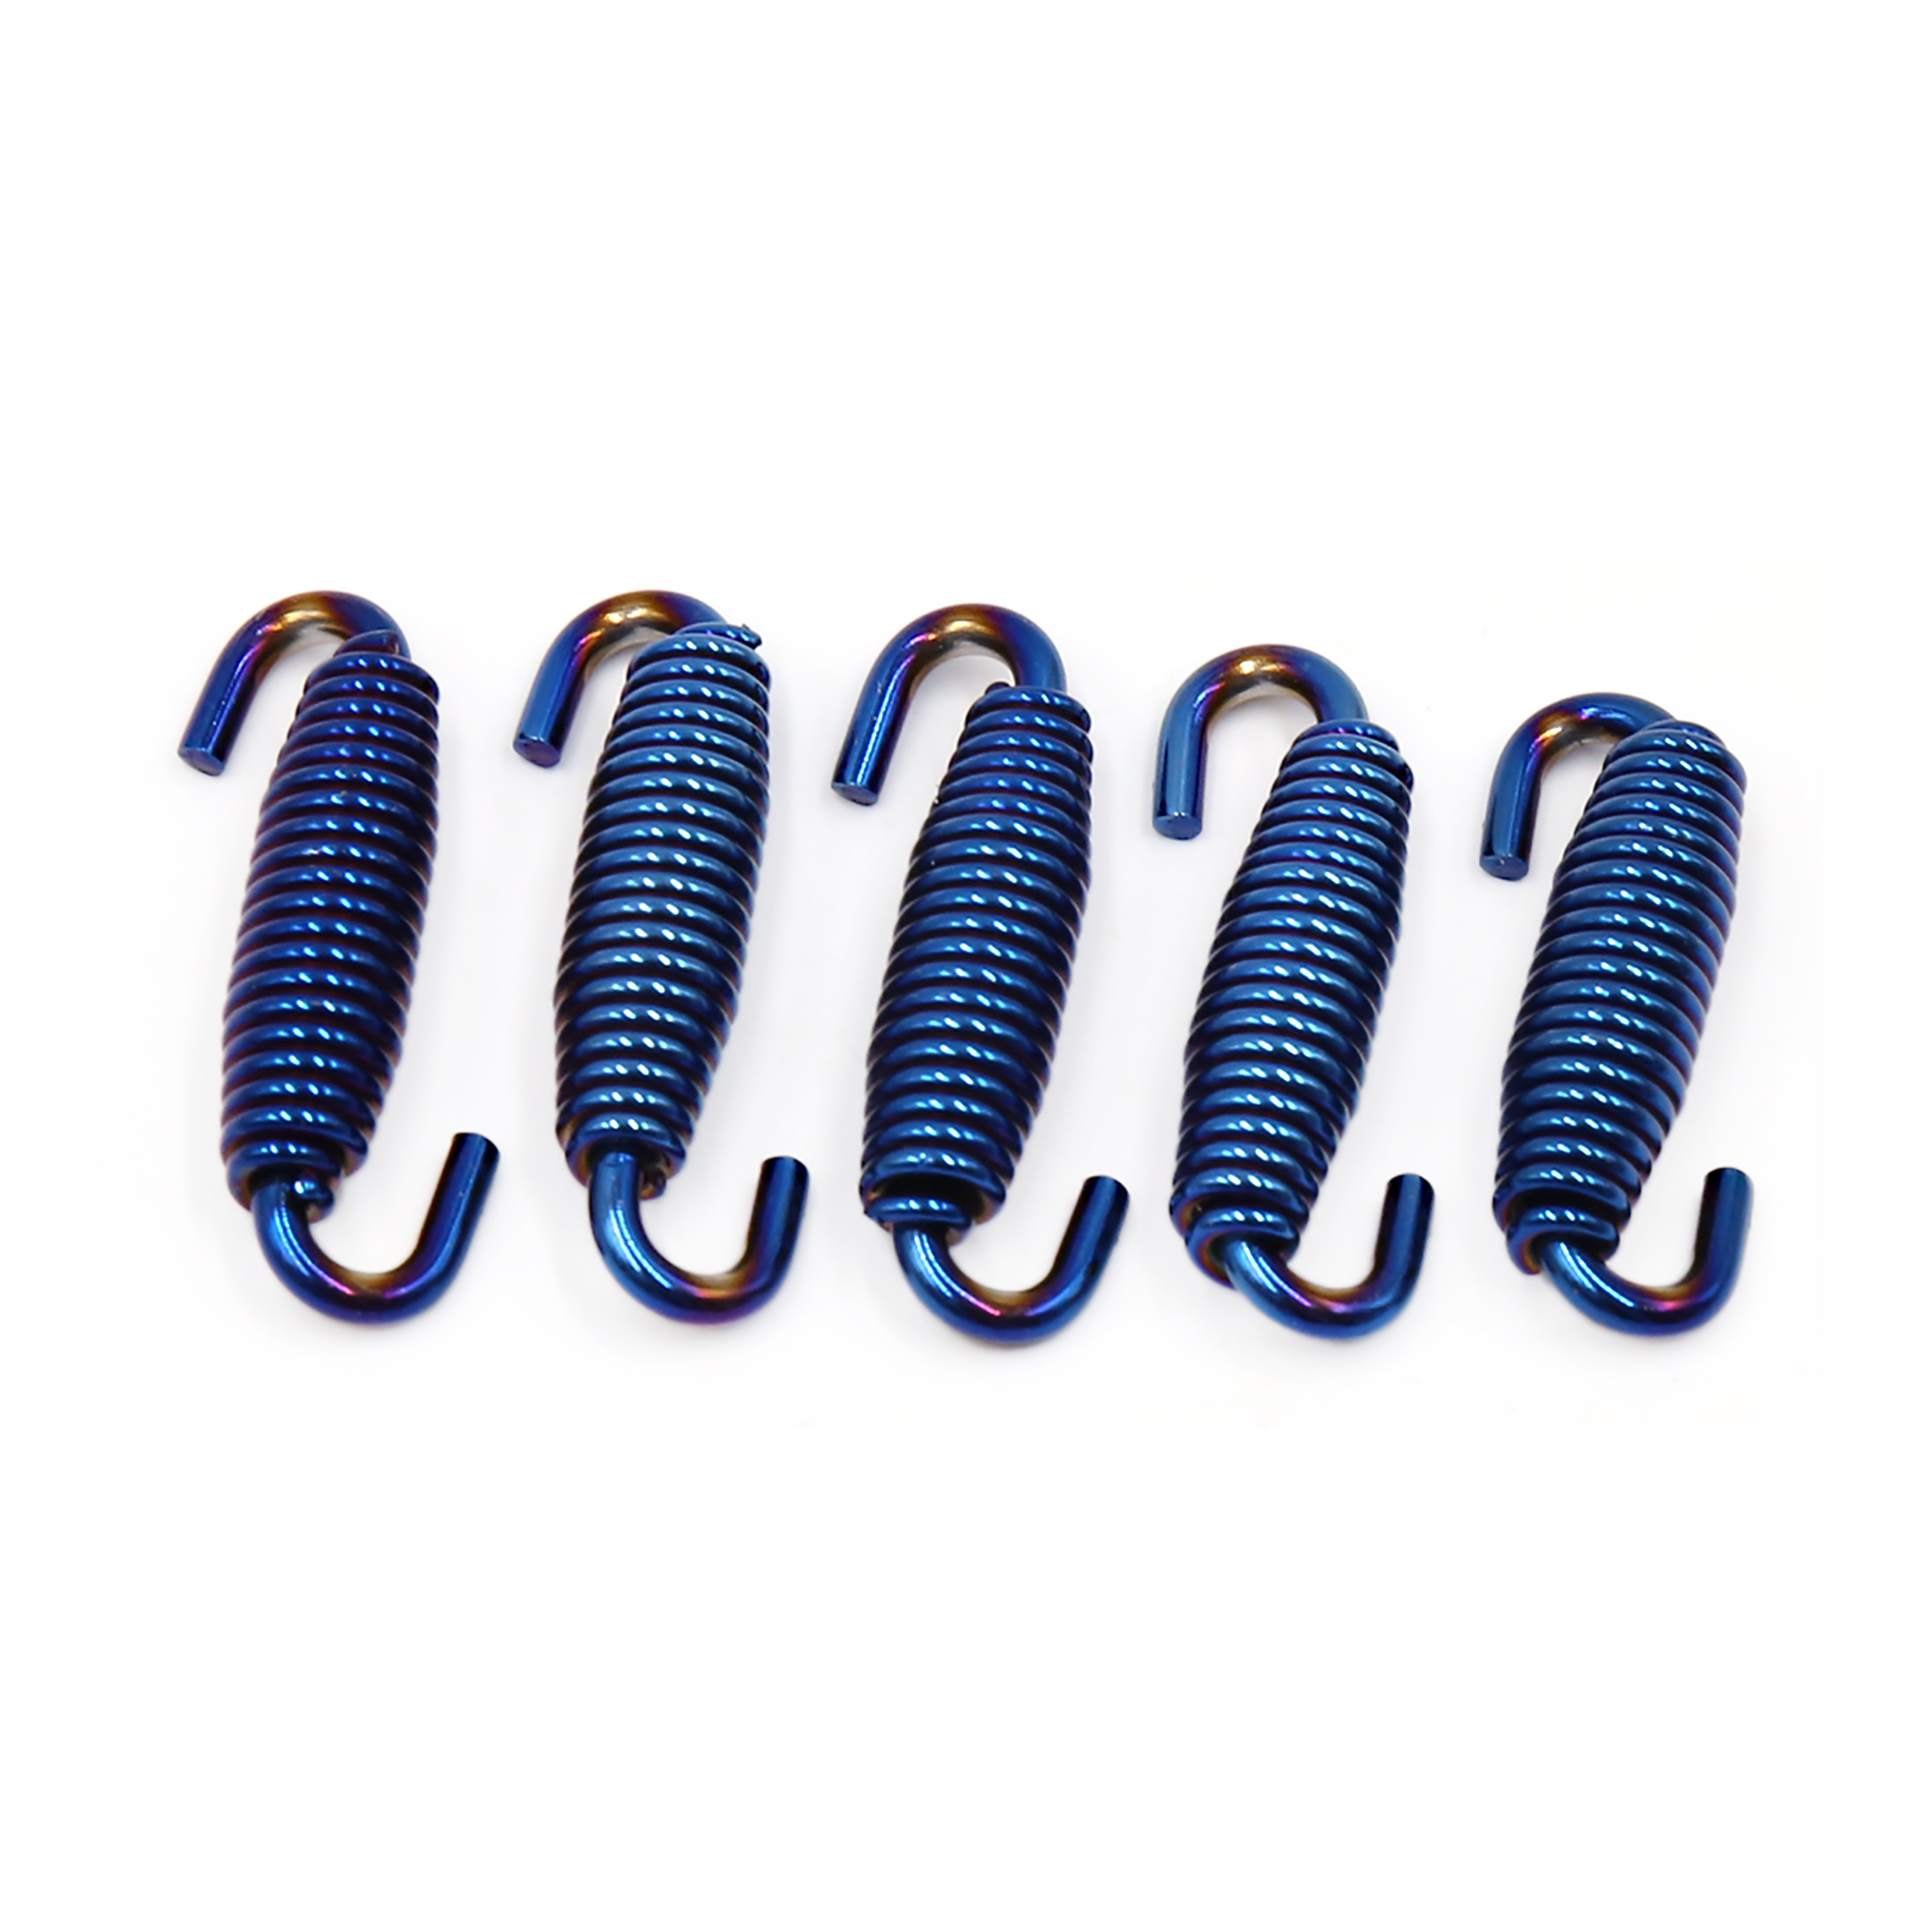 Unique Bargains 5Pcs 43mm Blue Motorcycle Exhaust Mounting Springs Expansion Link Tube